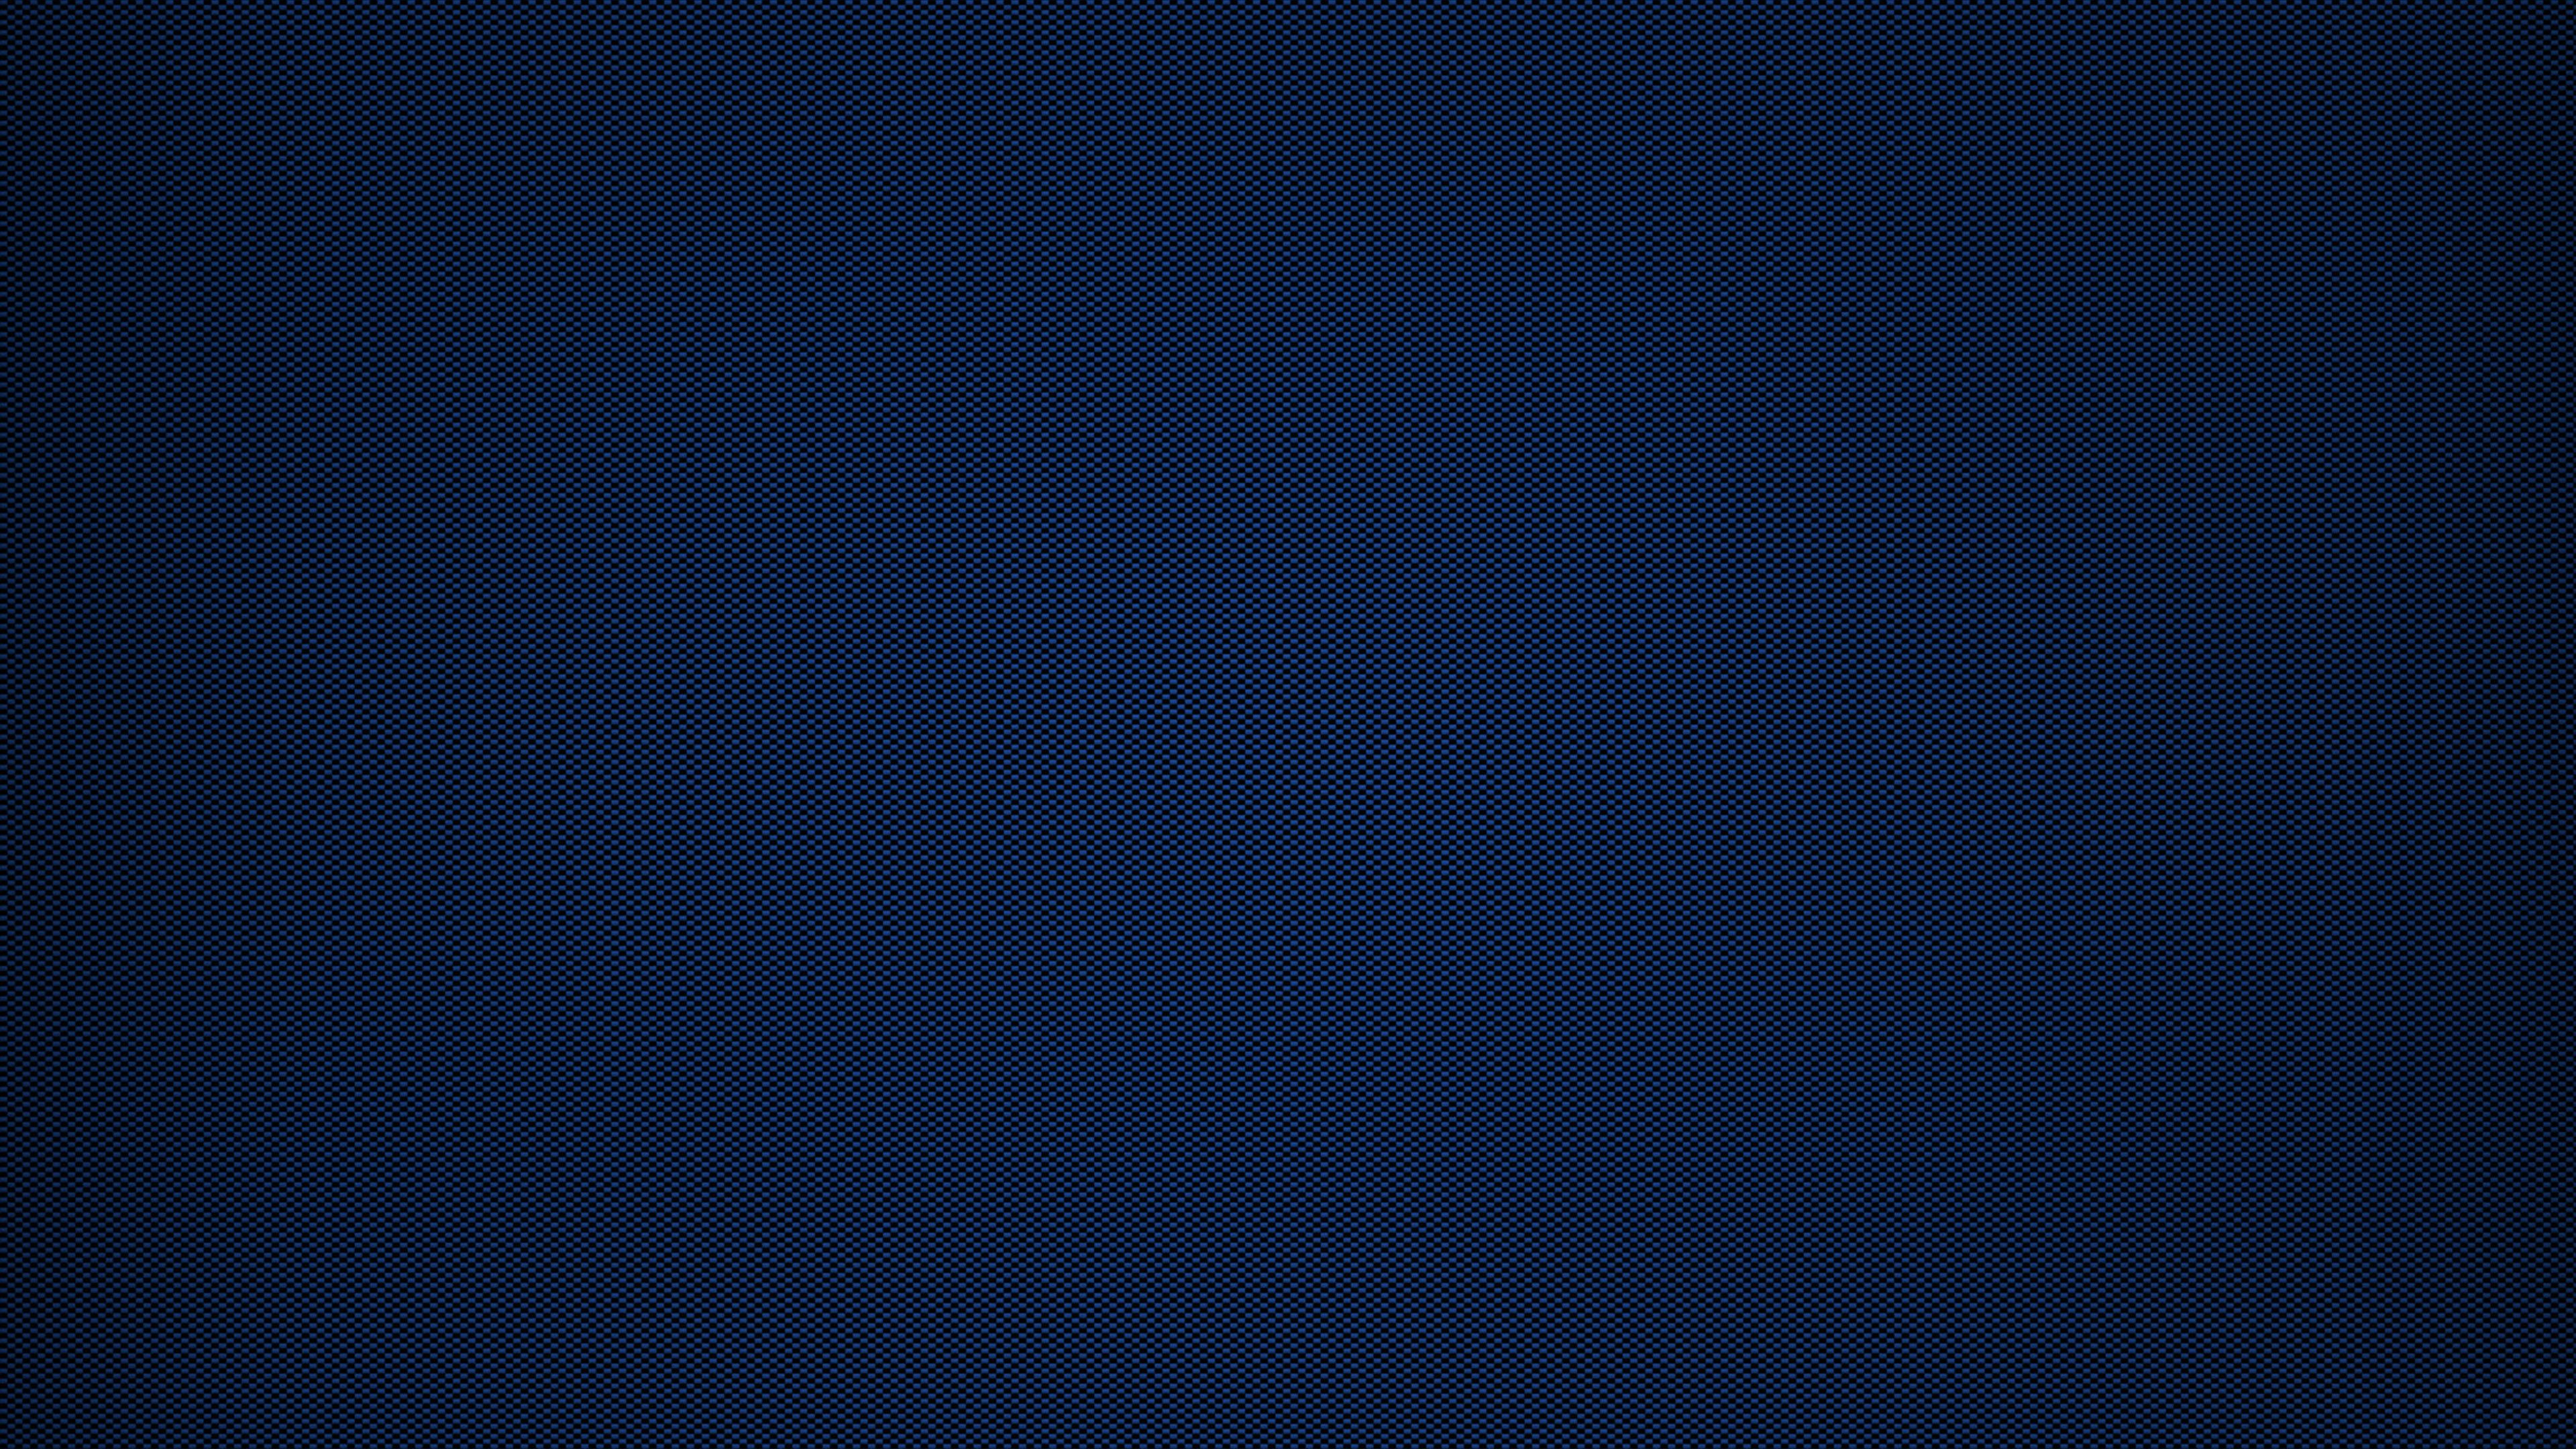 Navy blue wallpapers and backgrounds k hd dual screen